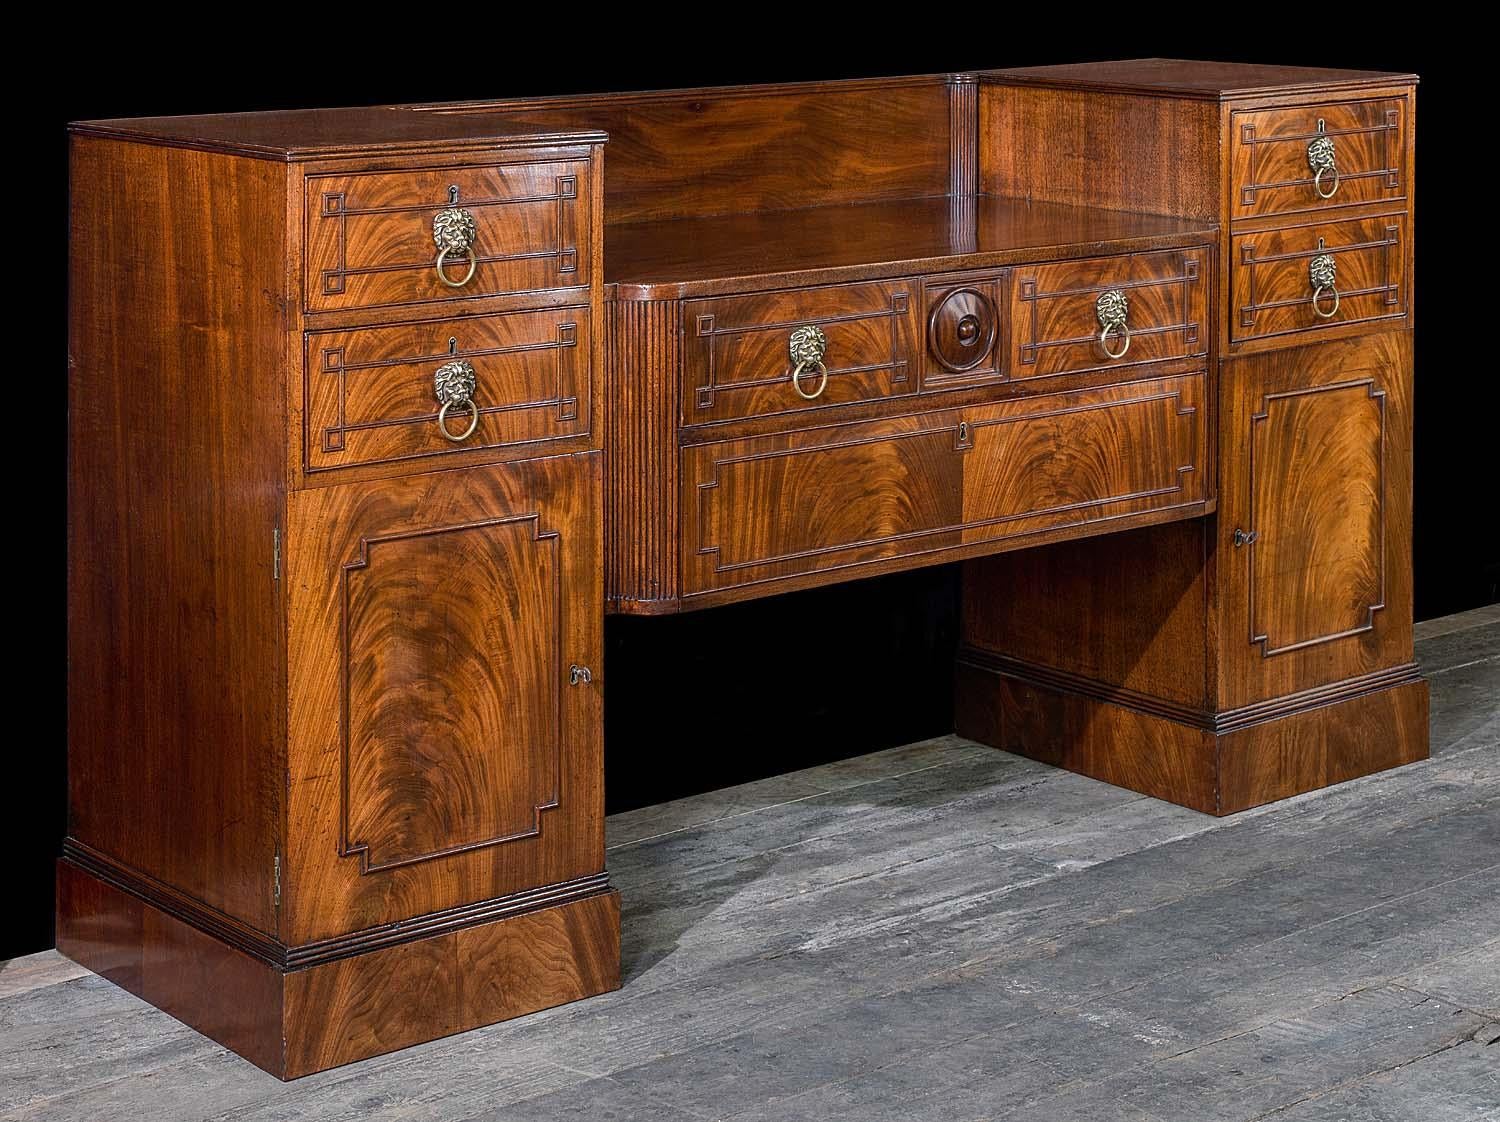 An early Regency twin pedestal sideboard in flame mahogany with a bowed tablet frieze which is flanked by two dovetailed drawers and a lower cupboard to the left, and a single dovetailed drawer mounted with a wine holder and lower cupboard to the